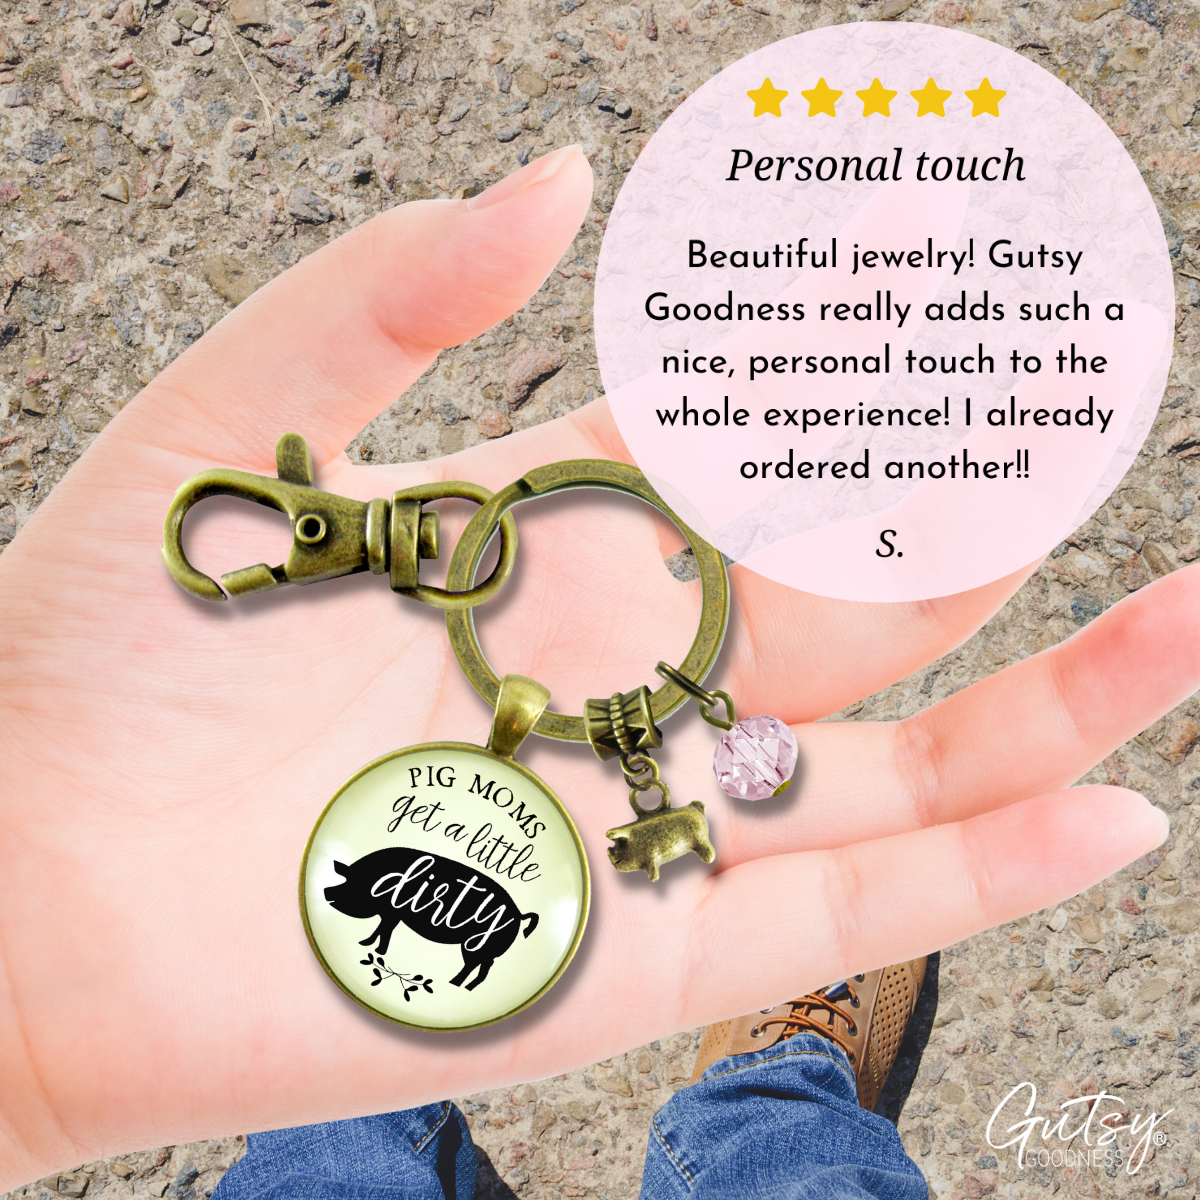 Pig Keychain Quote Pig Moms Get Dirty Sassy Country Girl Jewelry - Gutsy Goodness Handmade Jewelry;Pig Keychain Quote Pig Moms Get Dirty Sassy Country Girl Jewelry - Gutsy Goodness Handmade Jewelry Gifts